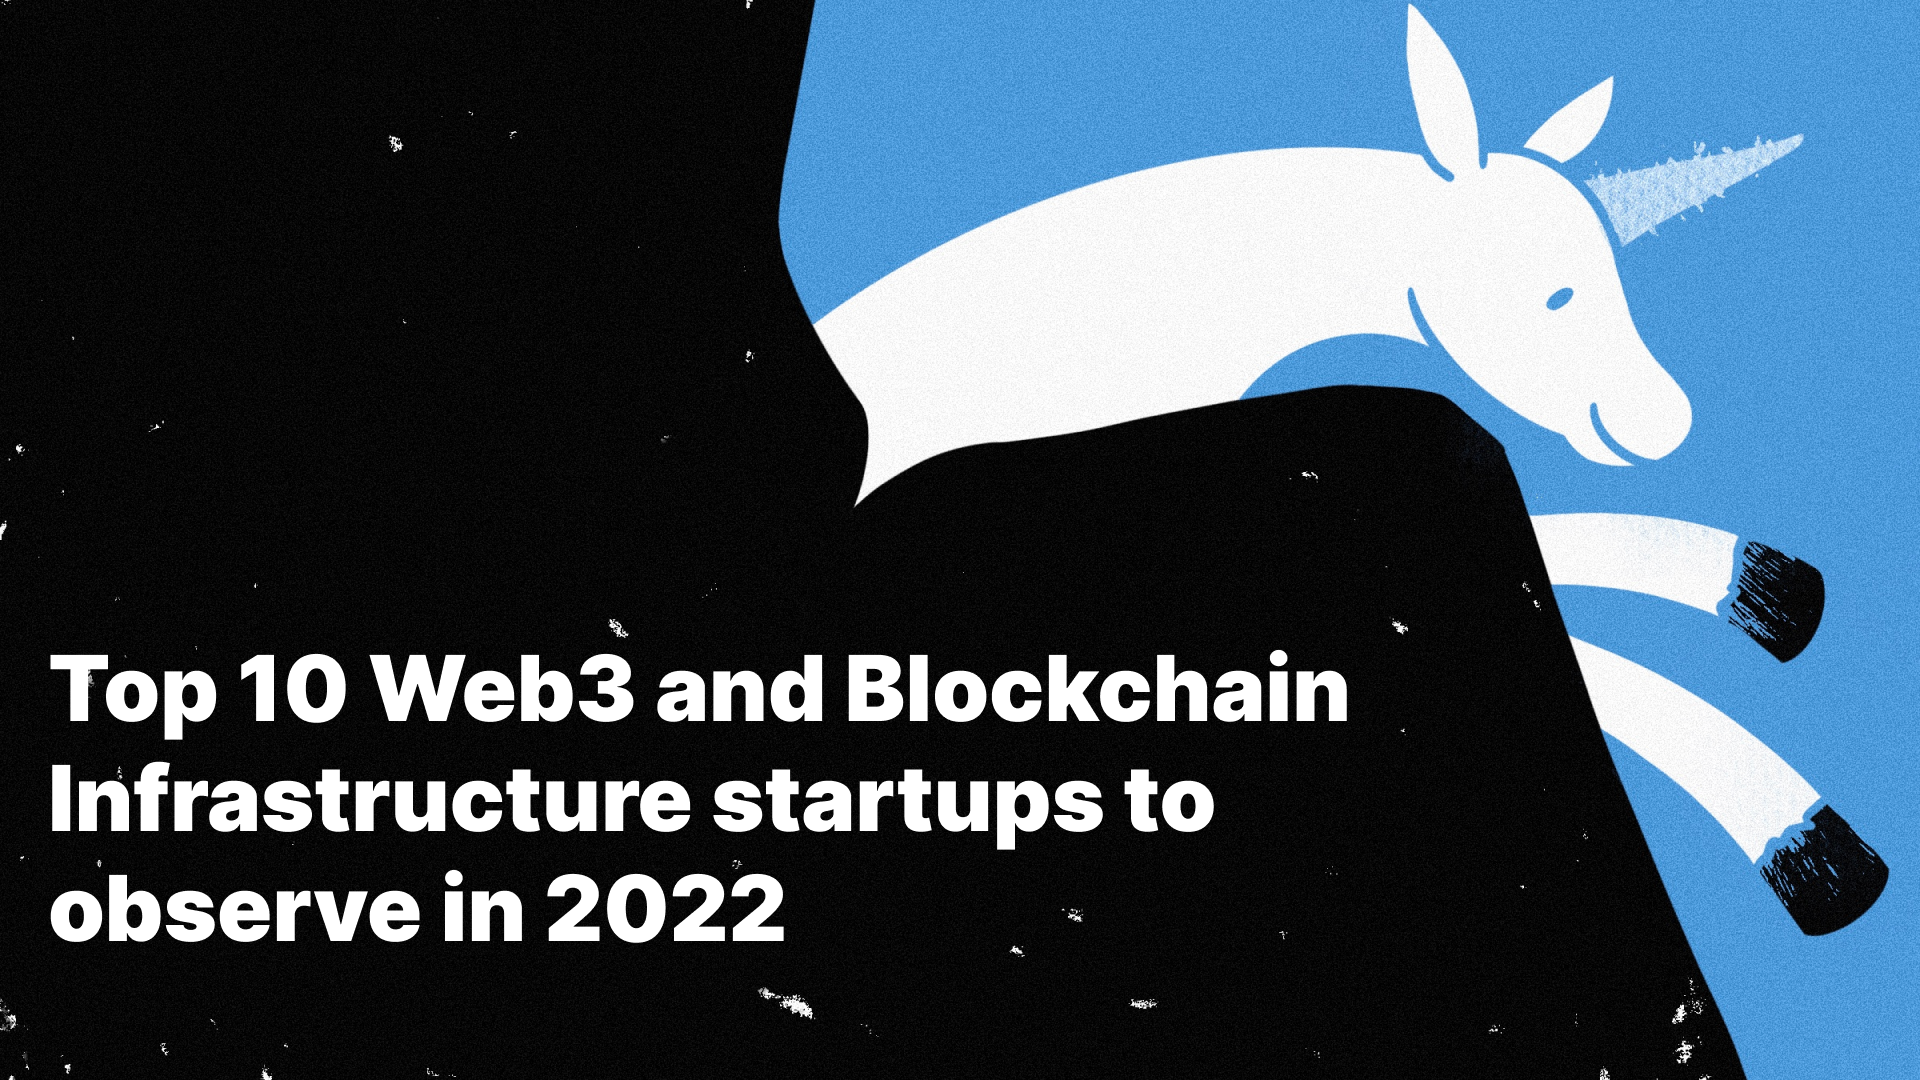 Top 10 Web3 and Blockchain Infrastructure startups to observe in 2022